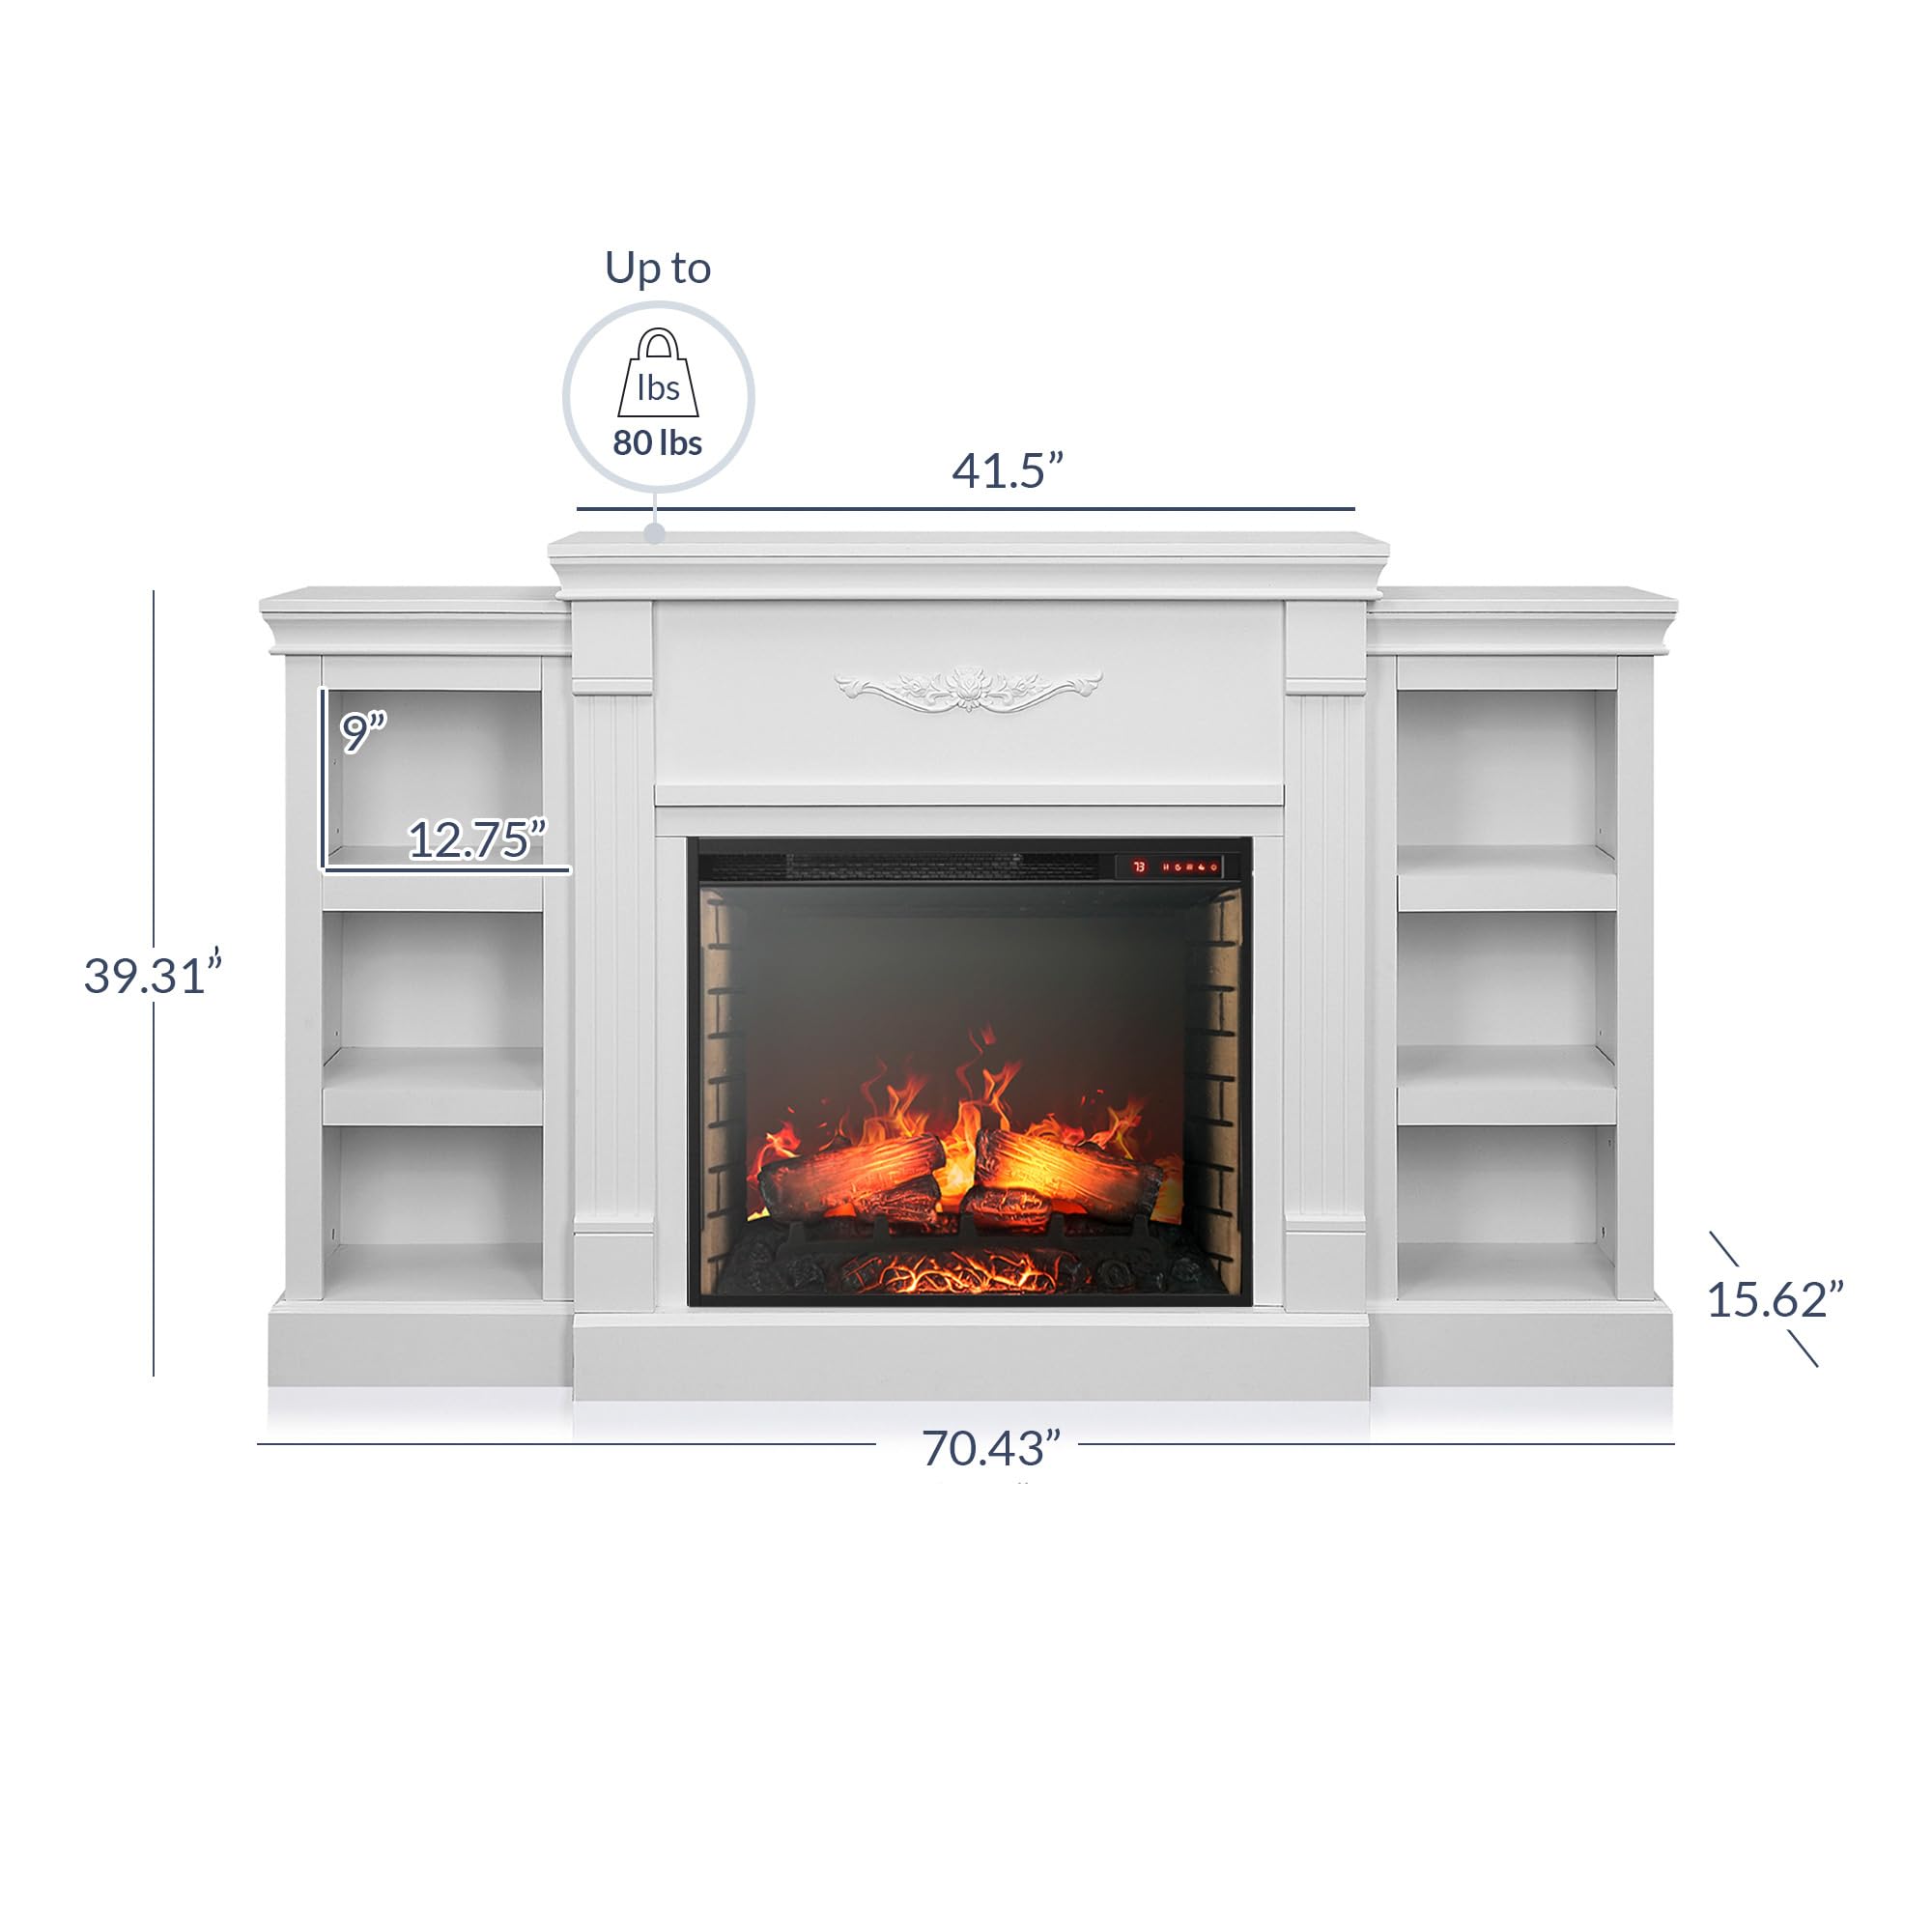 BELLEZE Modern 70" Electric Fireplace Heater Mantel TV Stand & Media Entertainment Center for TVs up to 68" with Energy-Efficient Heater and Side Book Shelves - Lenore (White)